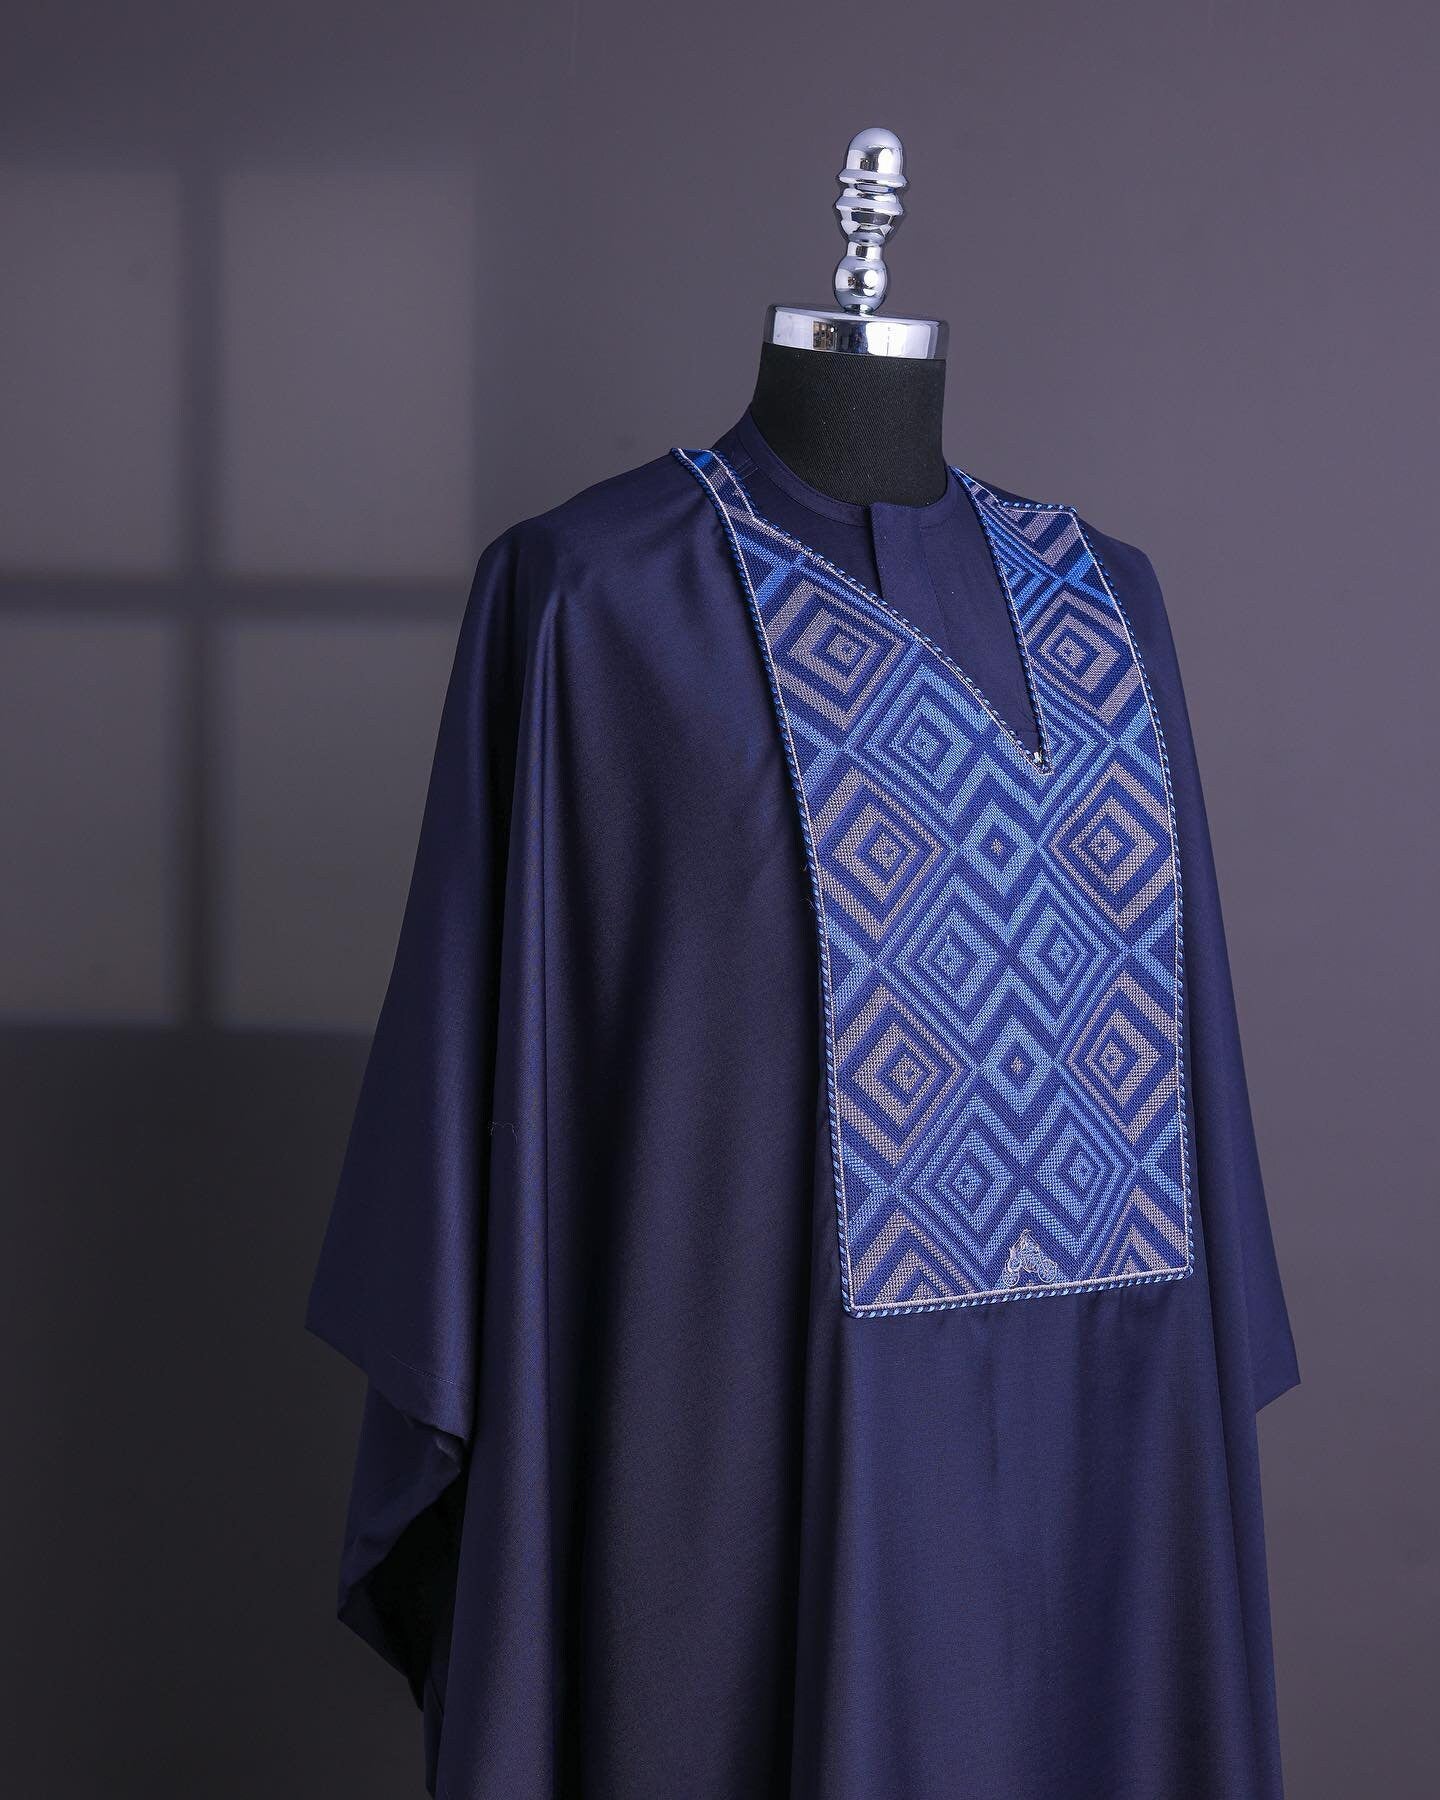 Luxury Blue Agbada Suit, Custom Nigerian Attire, African Fashion for Men, Traditional Agbada Outfit